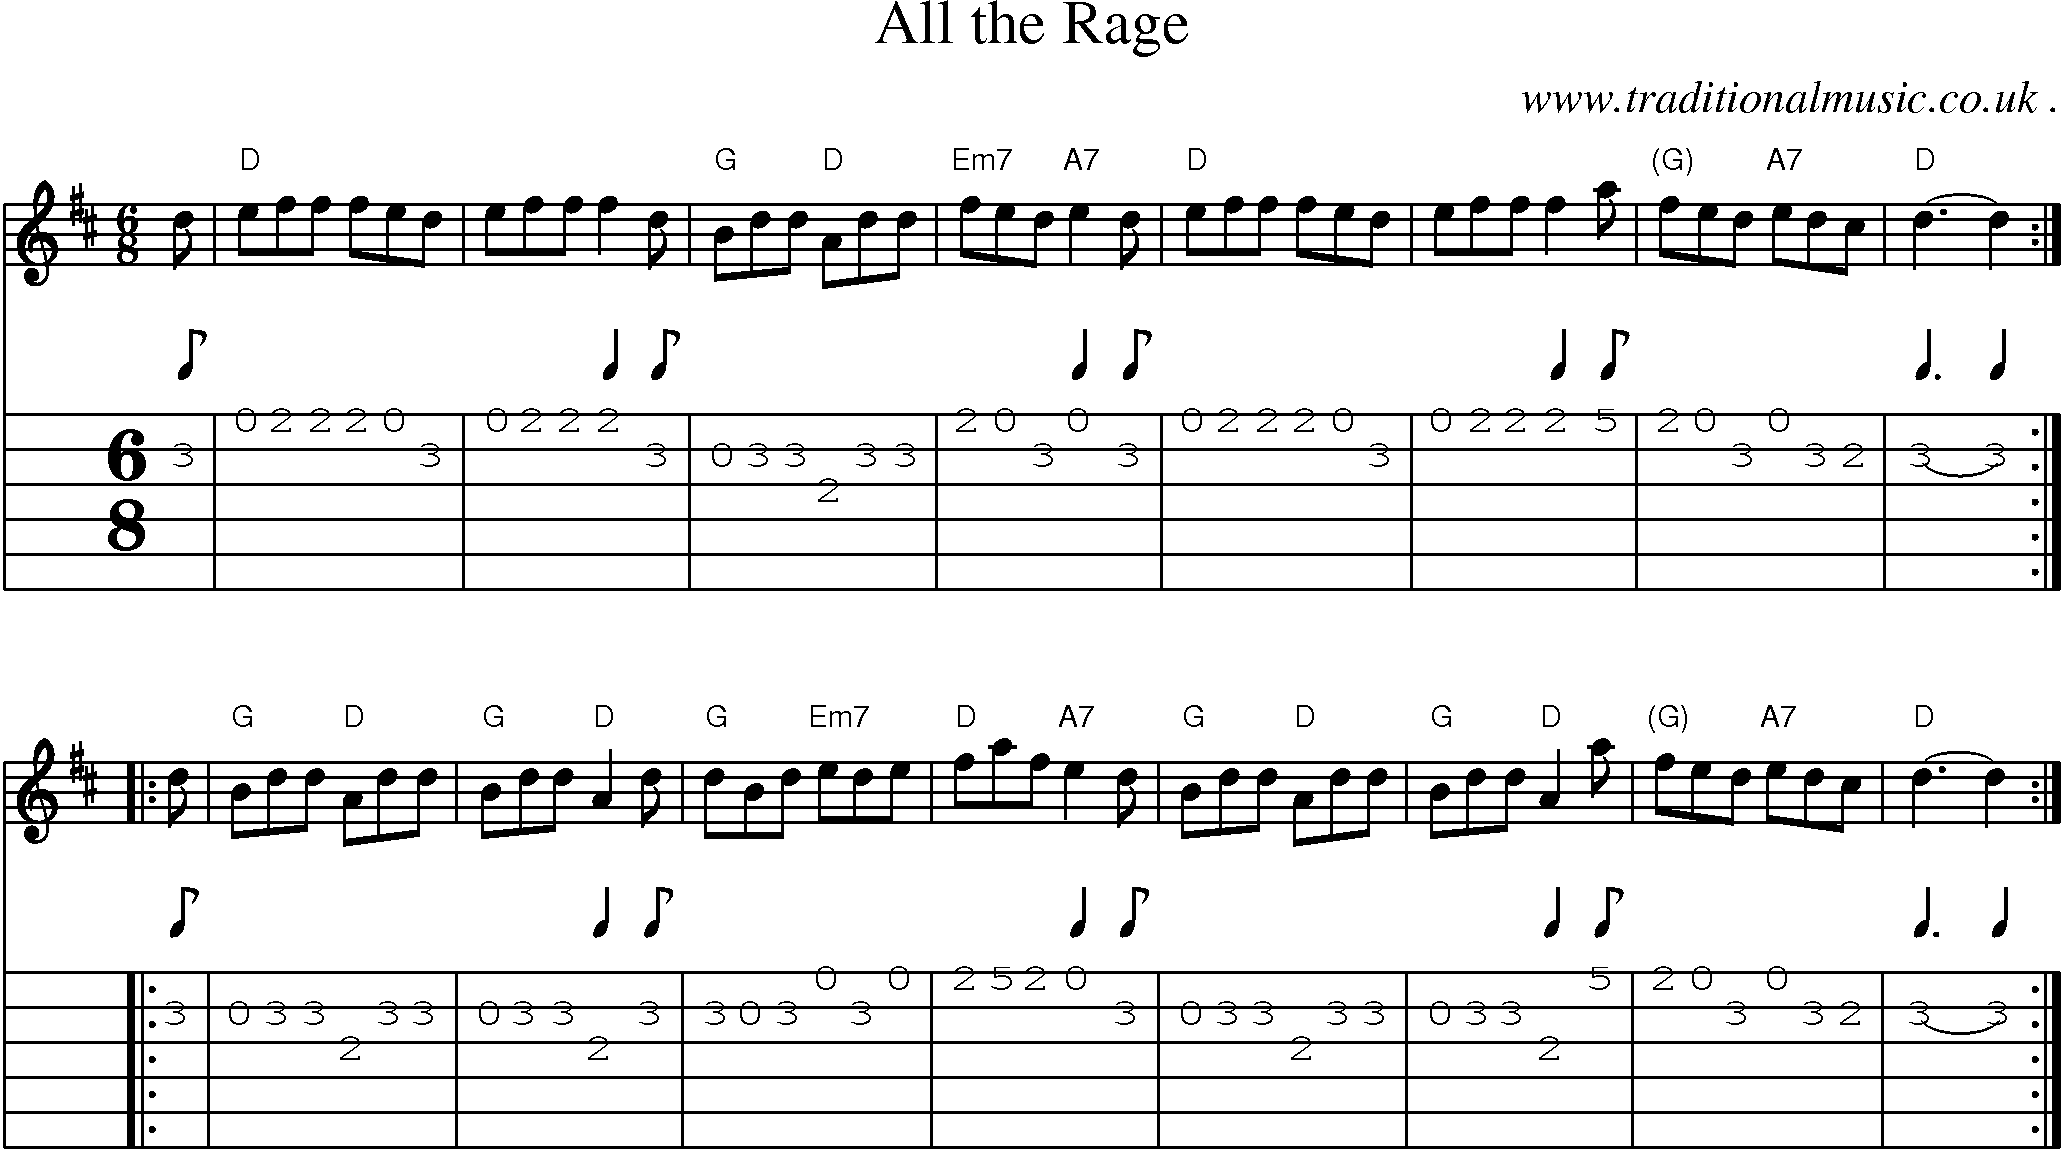 Sheet-music  score, Chords and Guitar Tabs for All The Rage